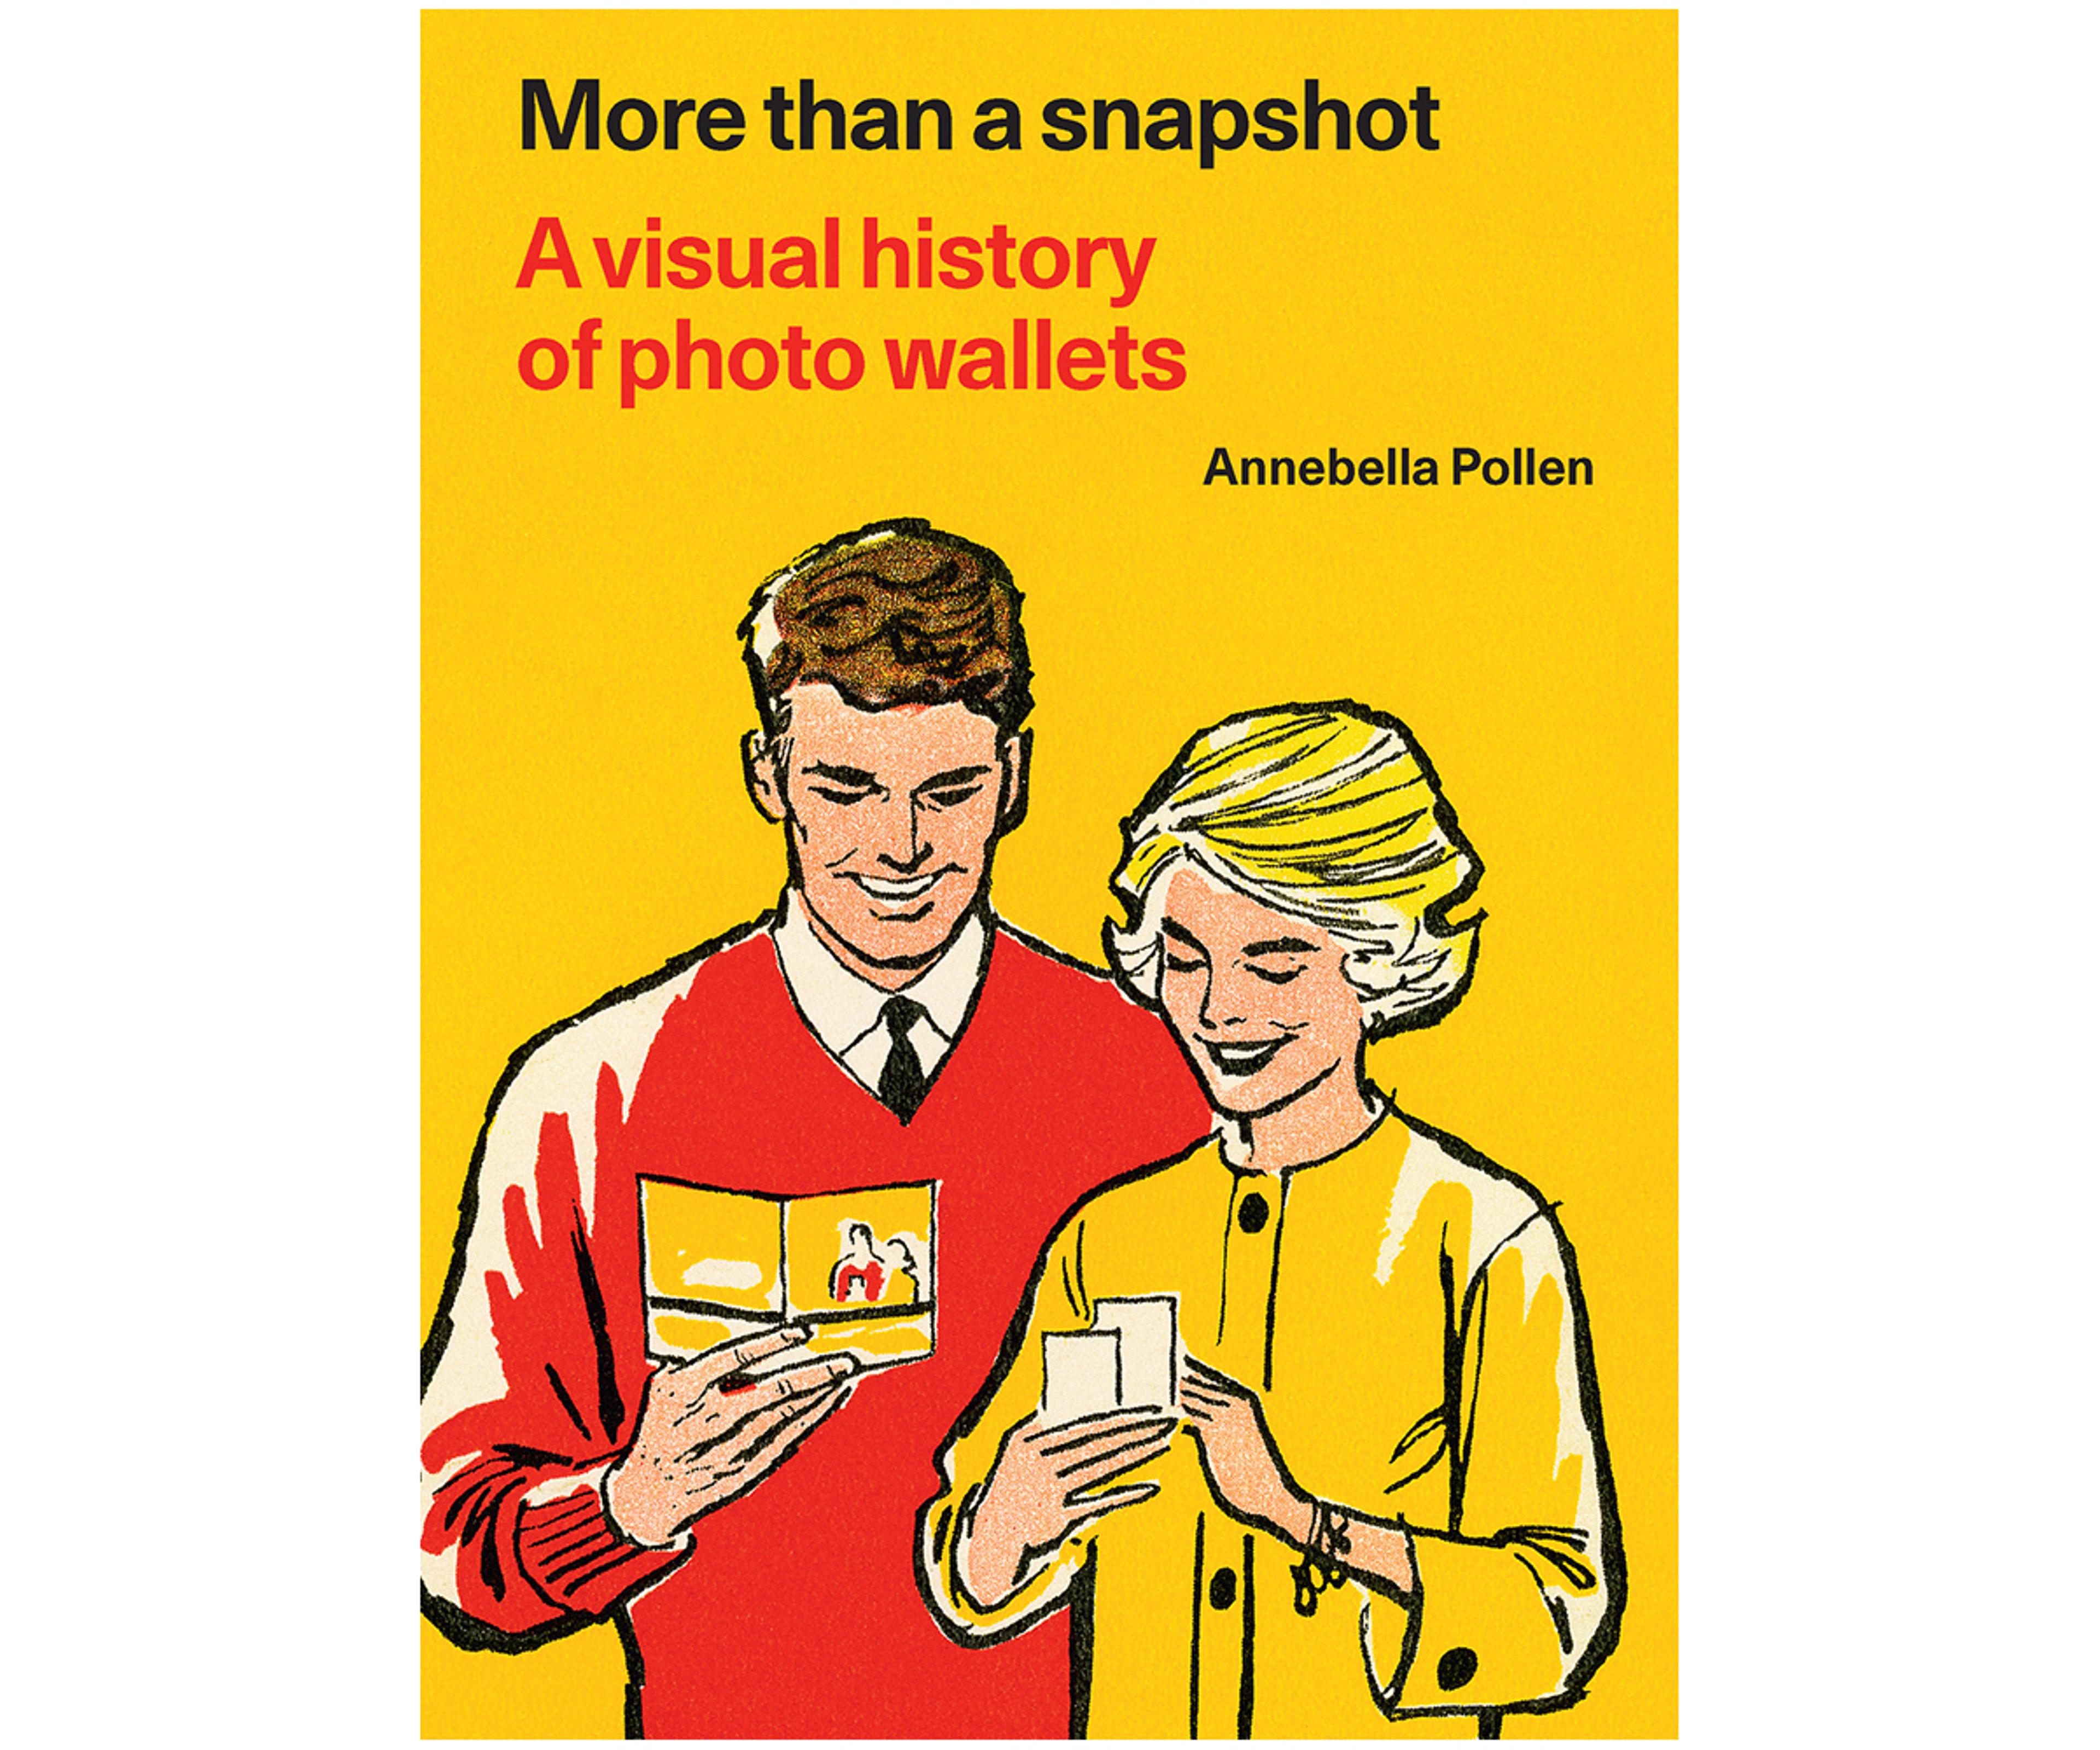 Front cover of a yellow book with the text 'More Than A Snapshot: A Visual History of Photo Wallets' and 'Annebella Pollen' with an illustration of two people looking at pieces of paper in their hands, both people smiling.